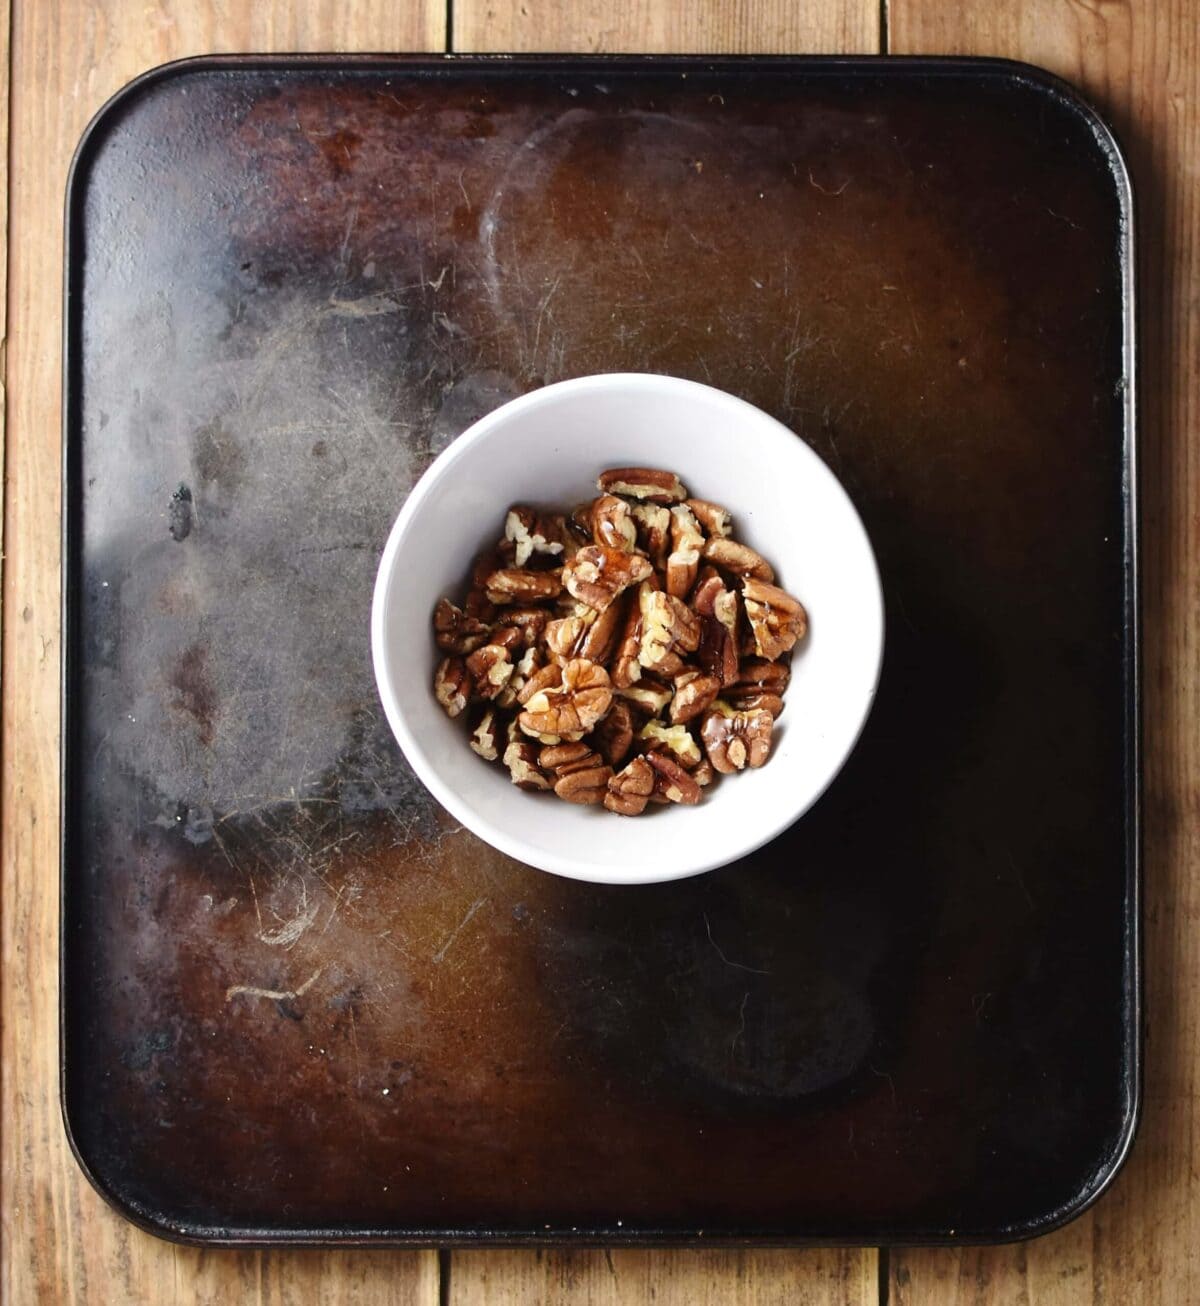 Chopped pecan nuts with maple syrup in small white bowl.